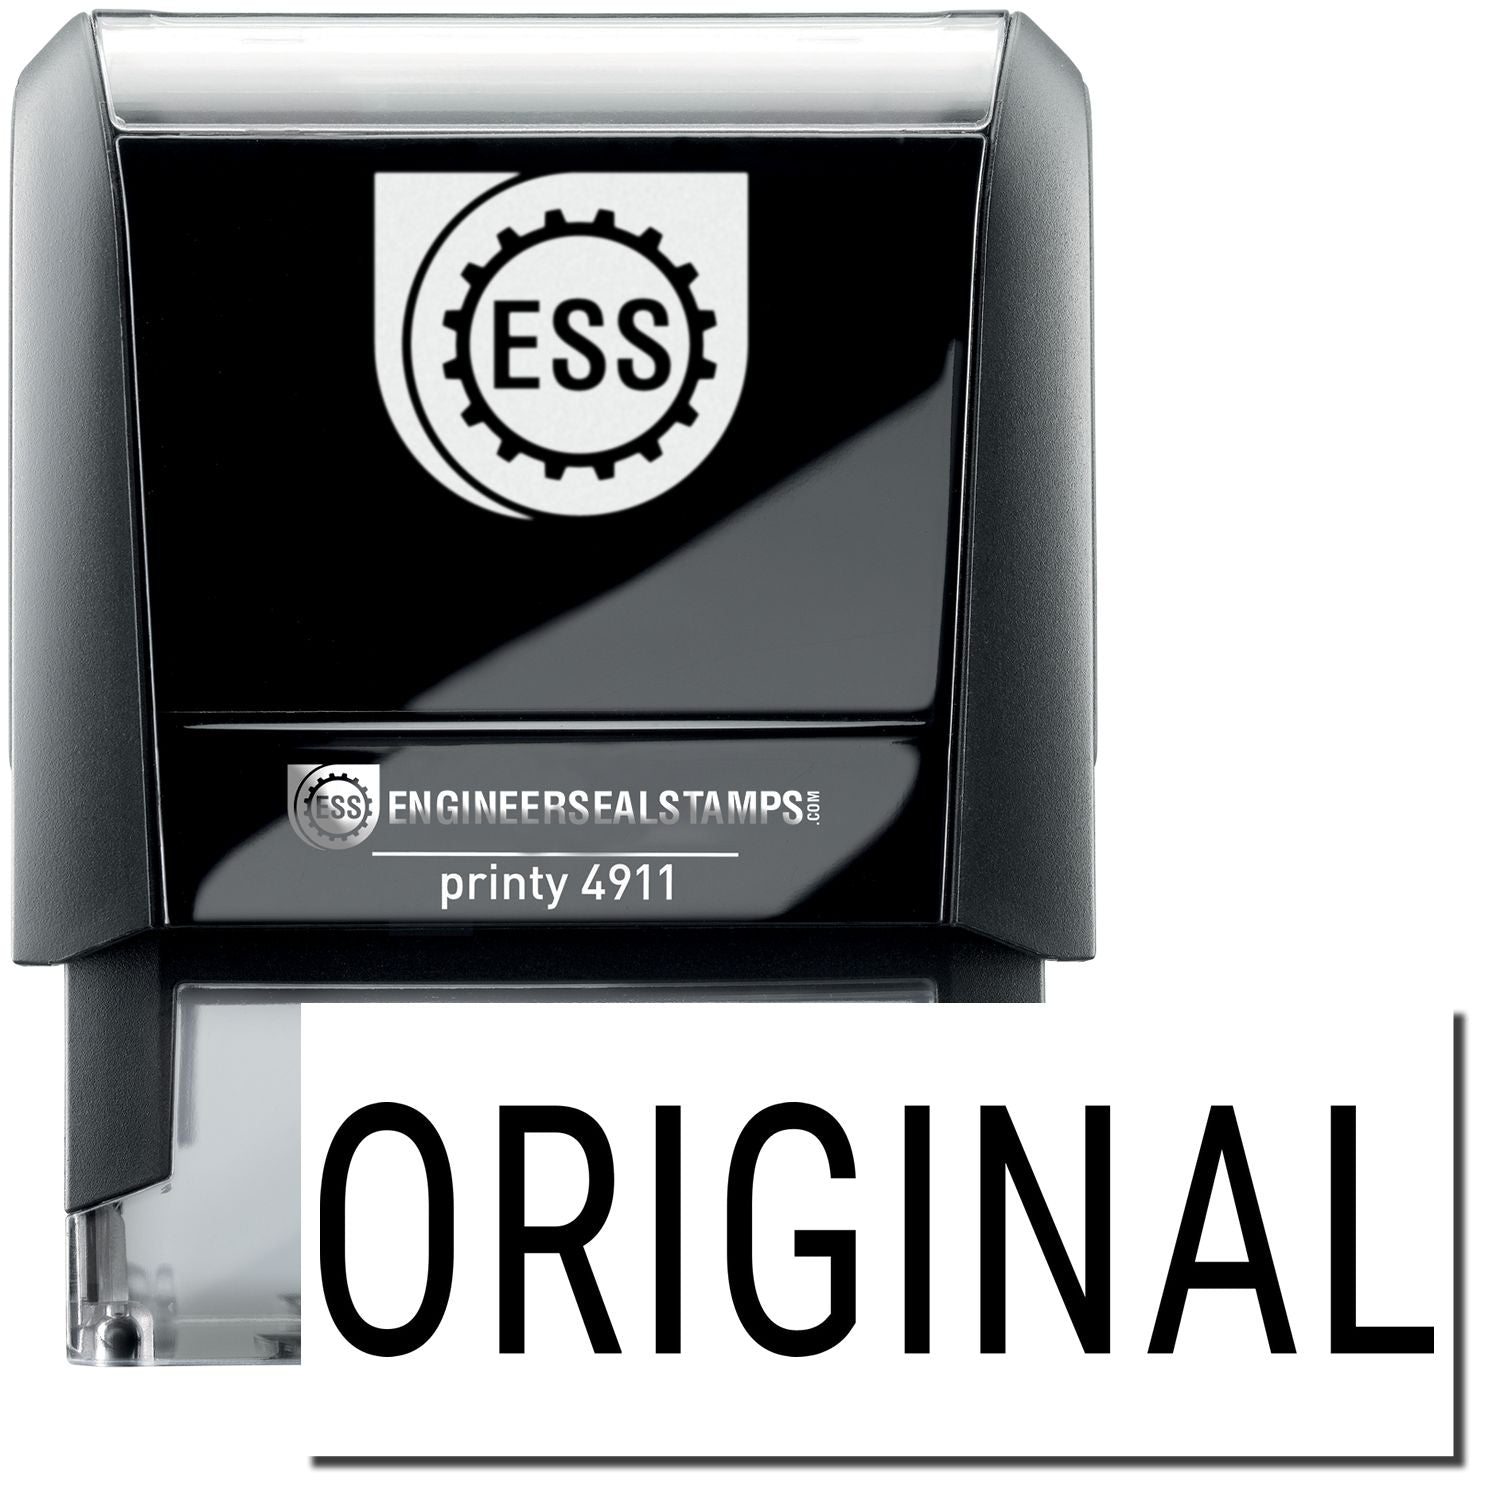 A self-inking stamp with a stamped image showing how the text "ORIGINAL" in a narrow font is displayed after stamping.